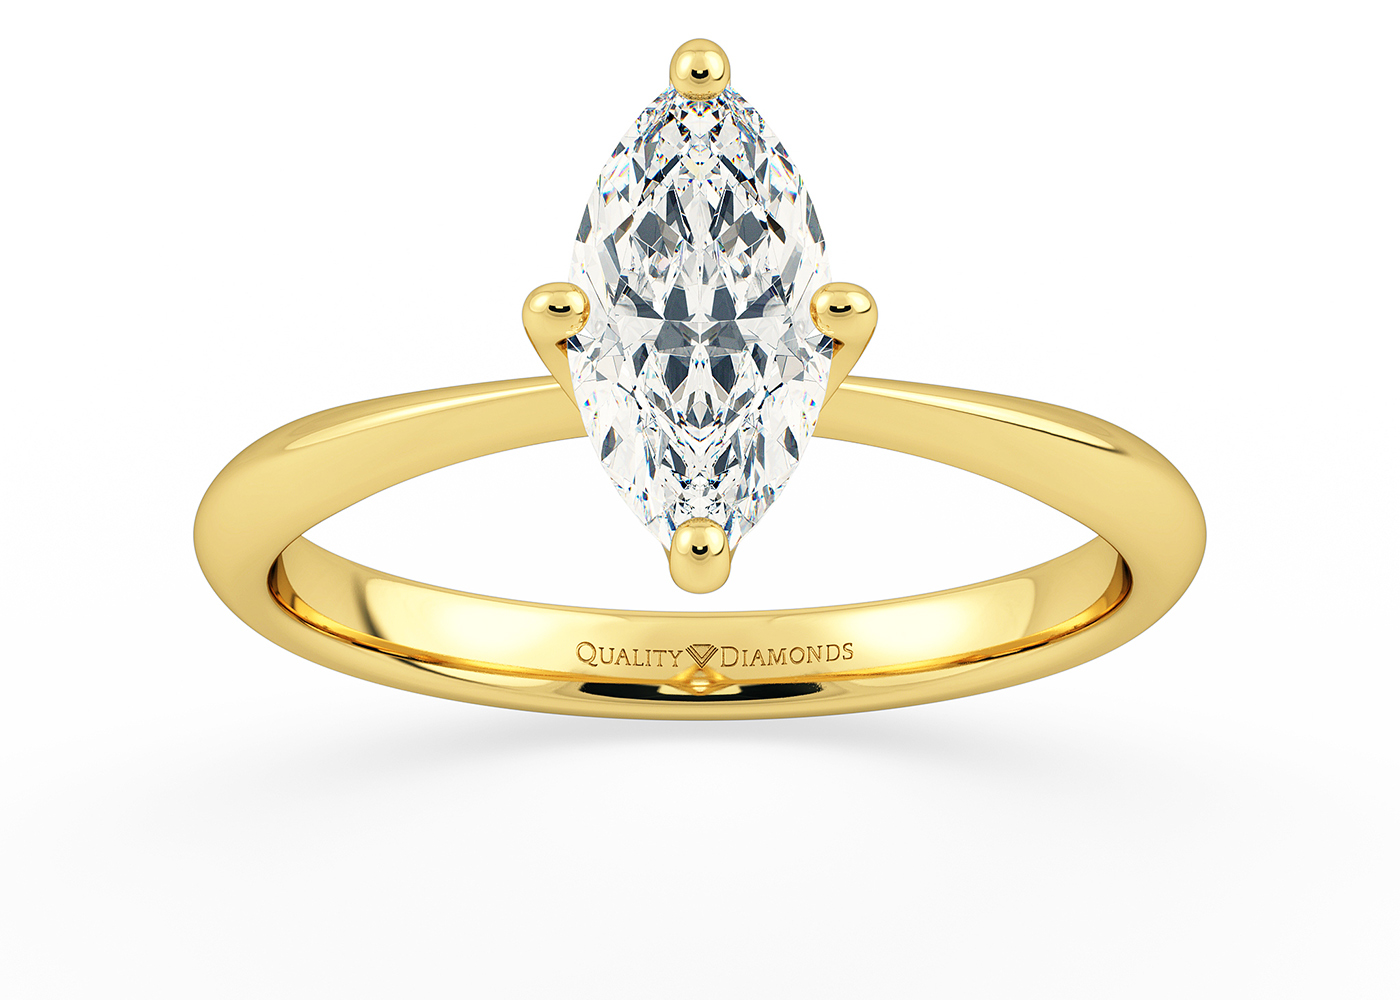 One Carat Marquise Solitaire Diamond Engagement Ring in 18K Yellow Gold